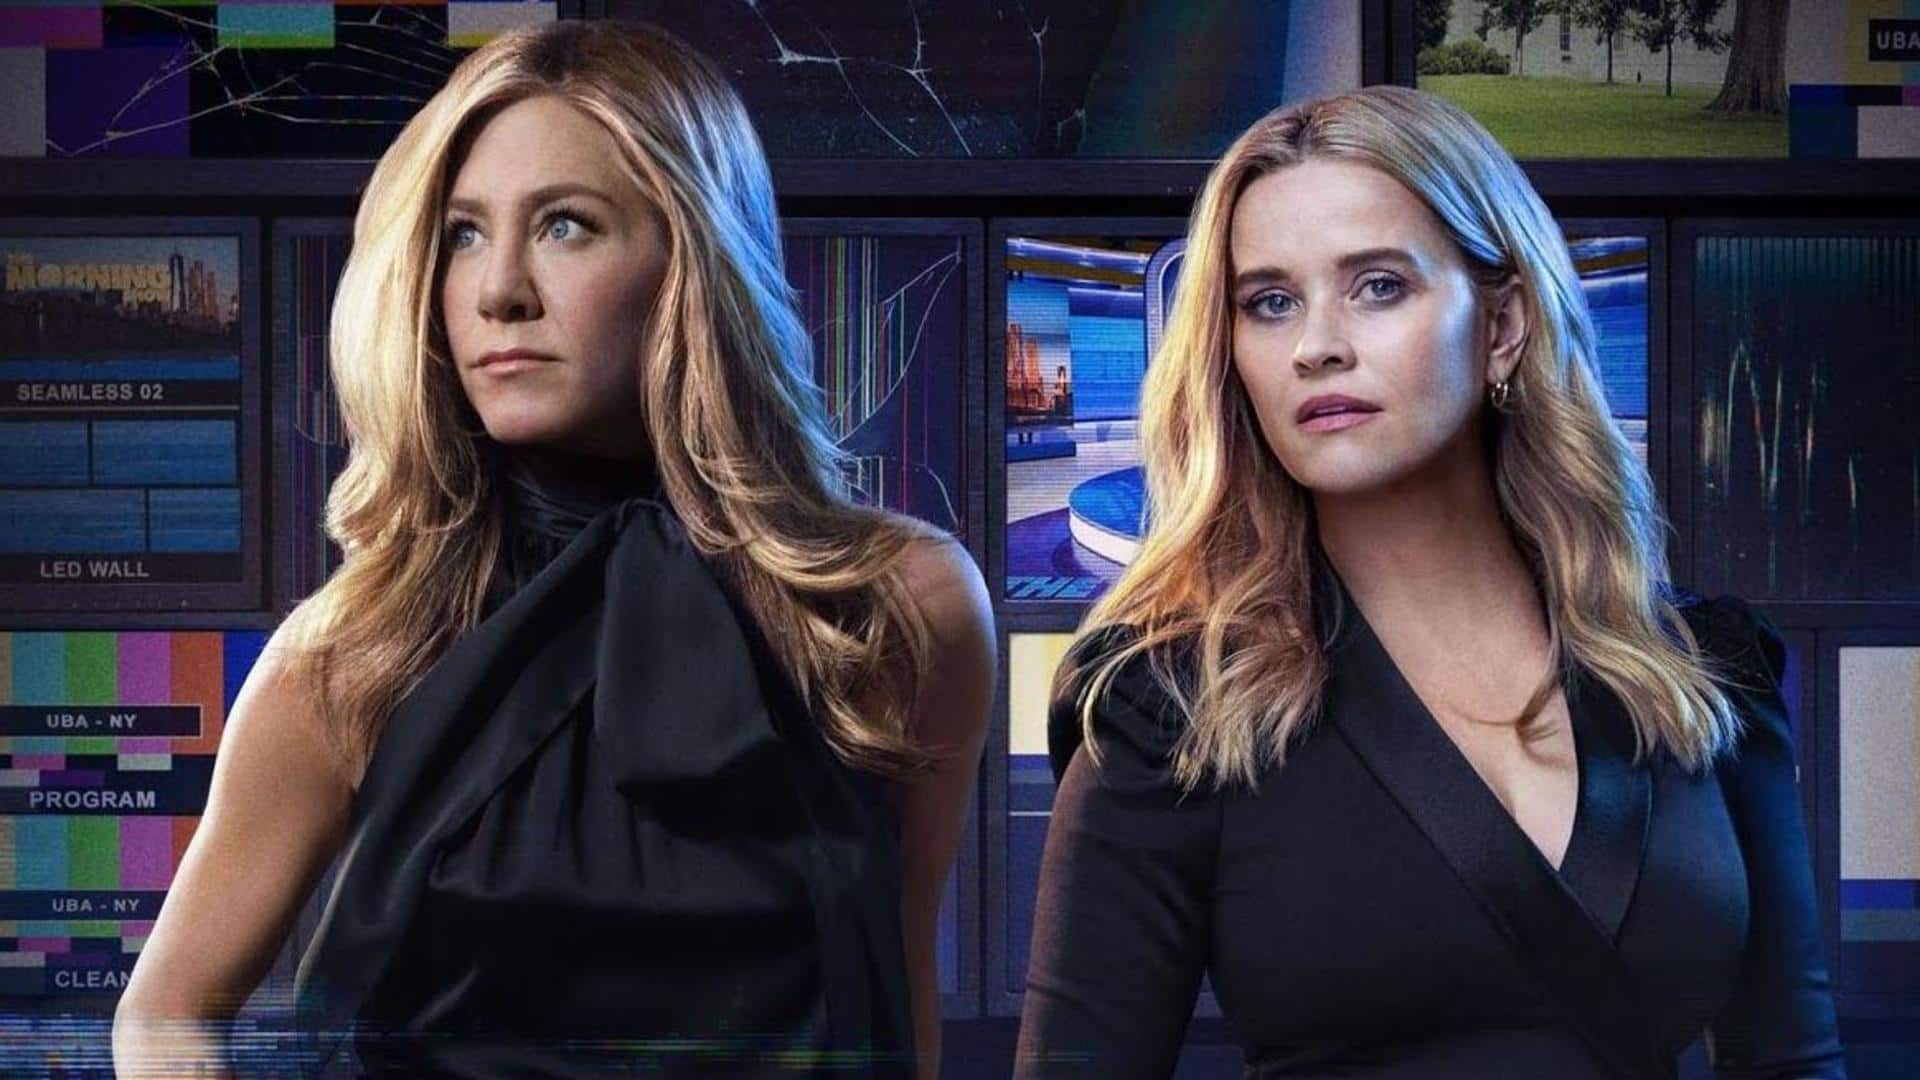 Jennifer Aniston-Reese Witherspoon's 'The Morning Show' renewed for Season 4